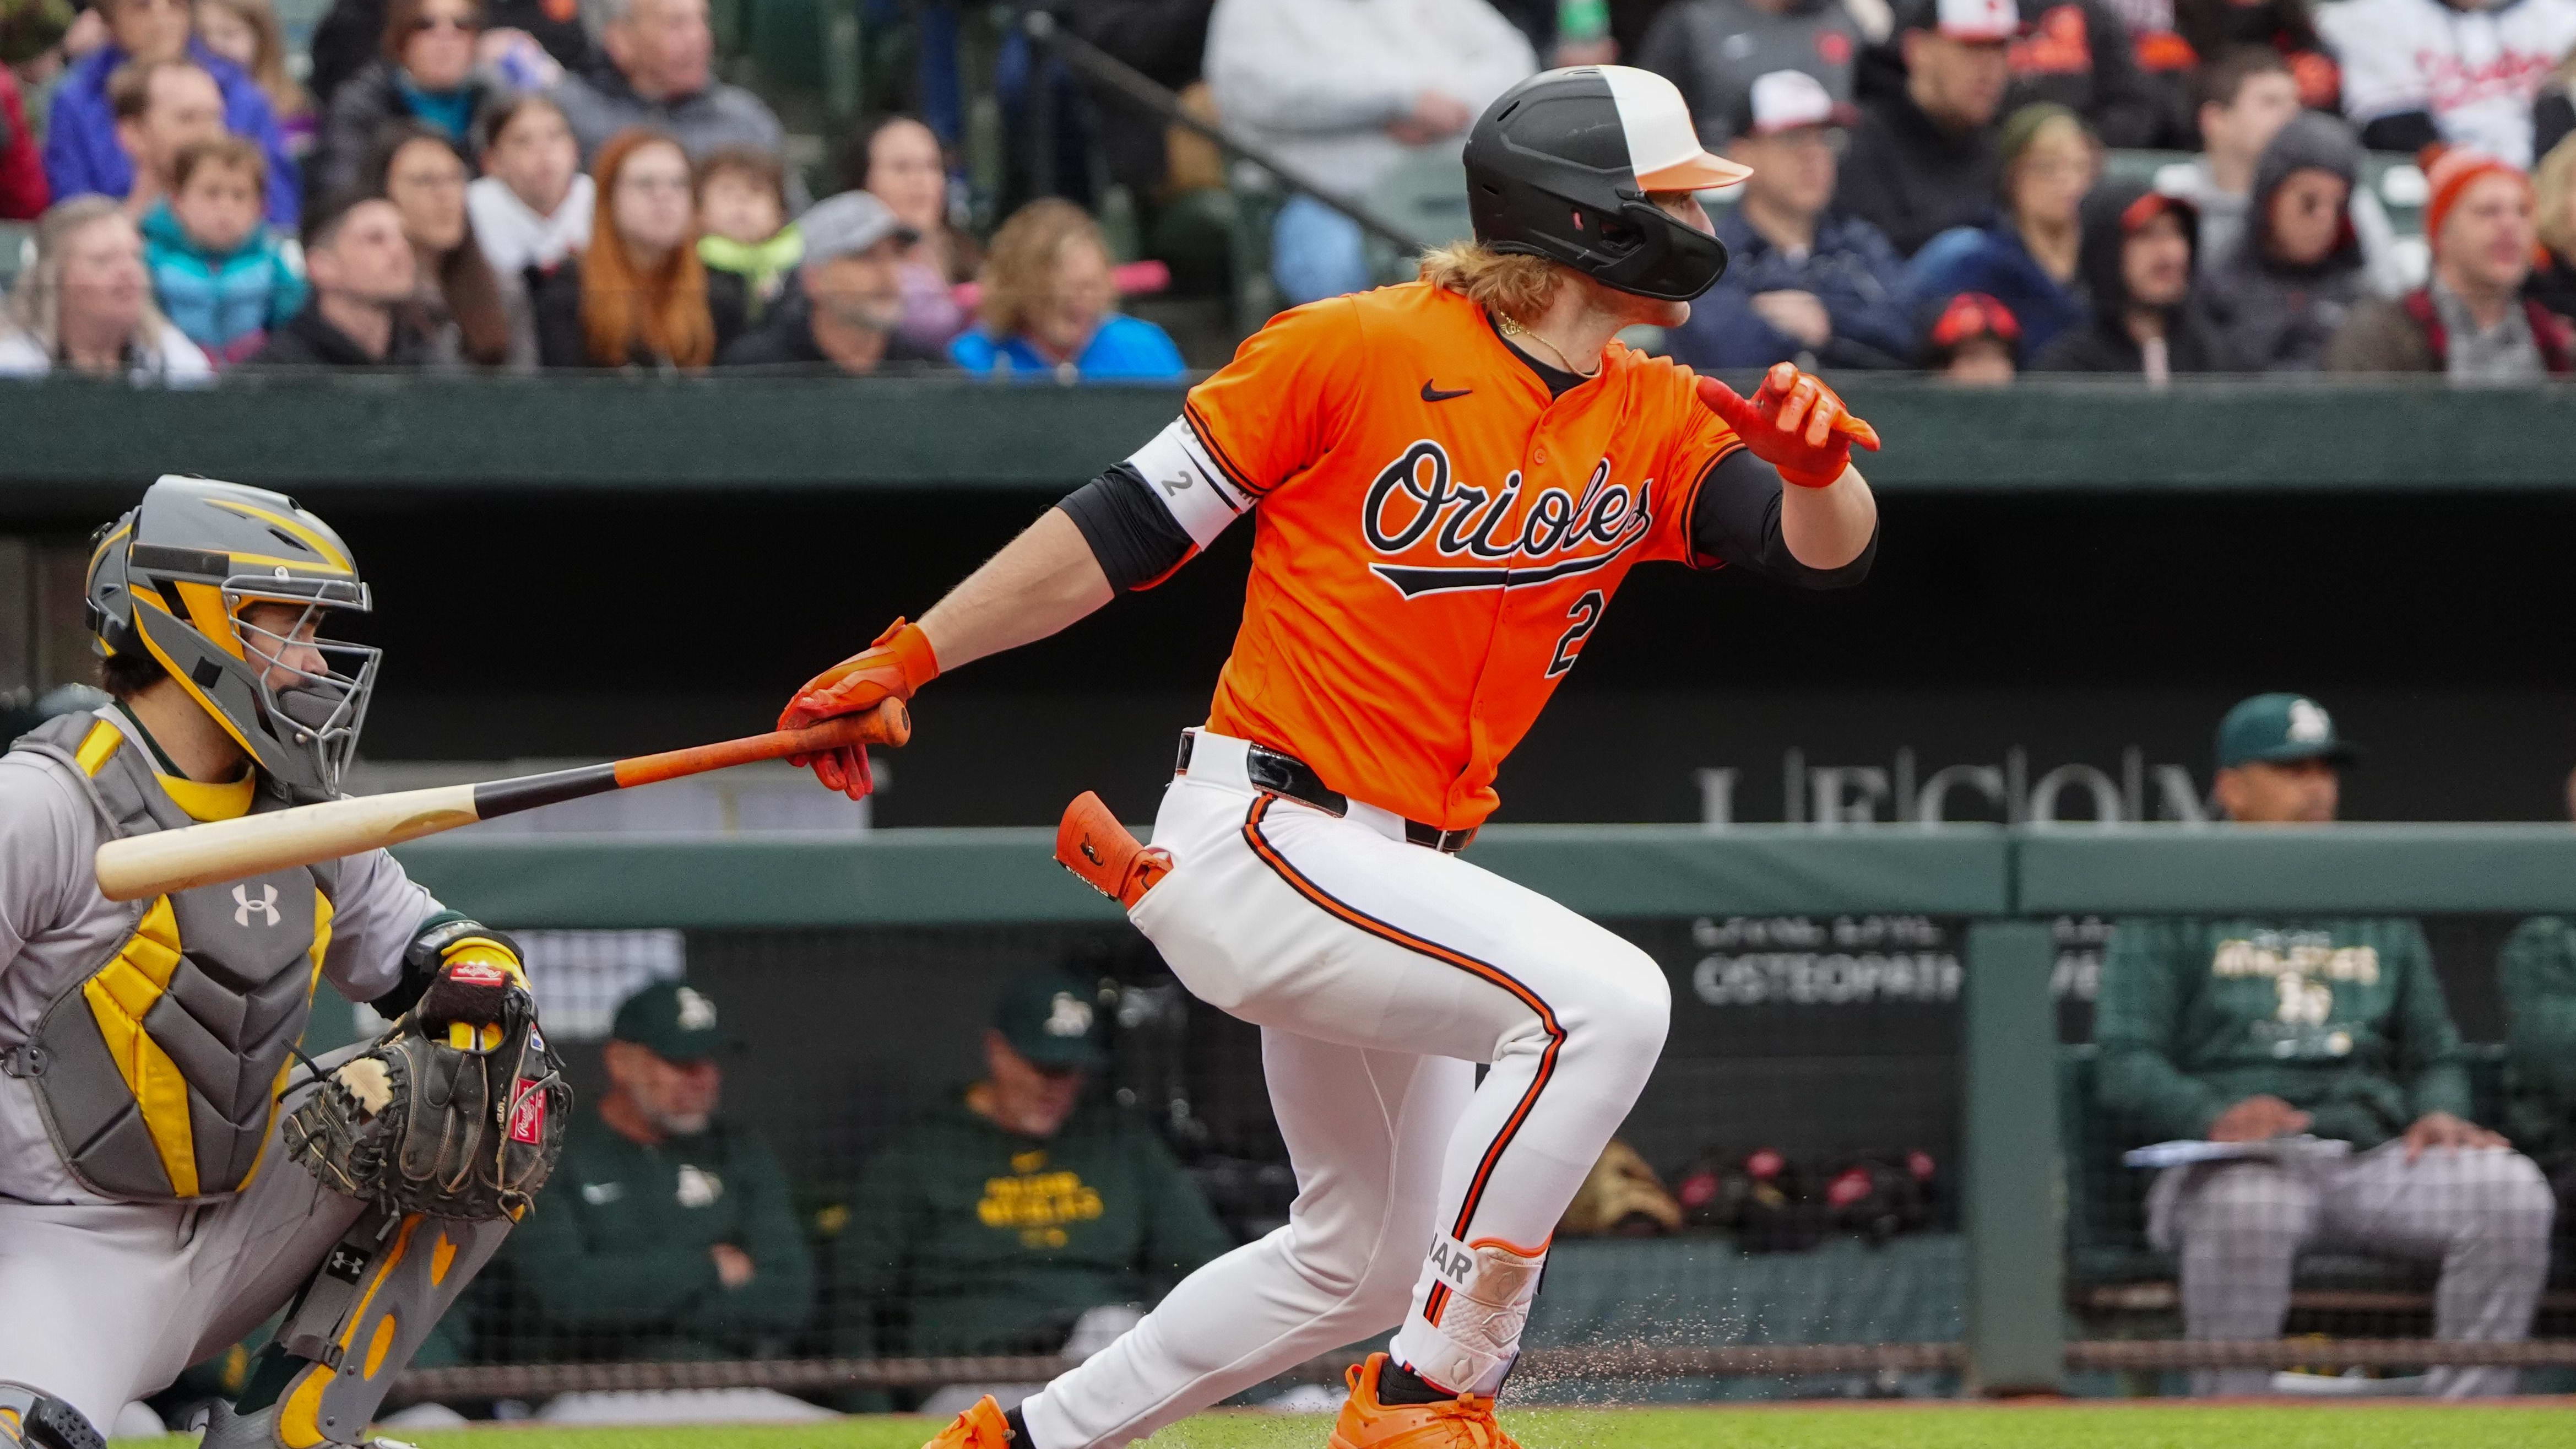 Orioles Young Superstar Primed to Make First All-Star Team